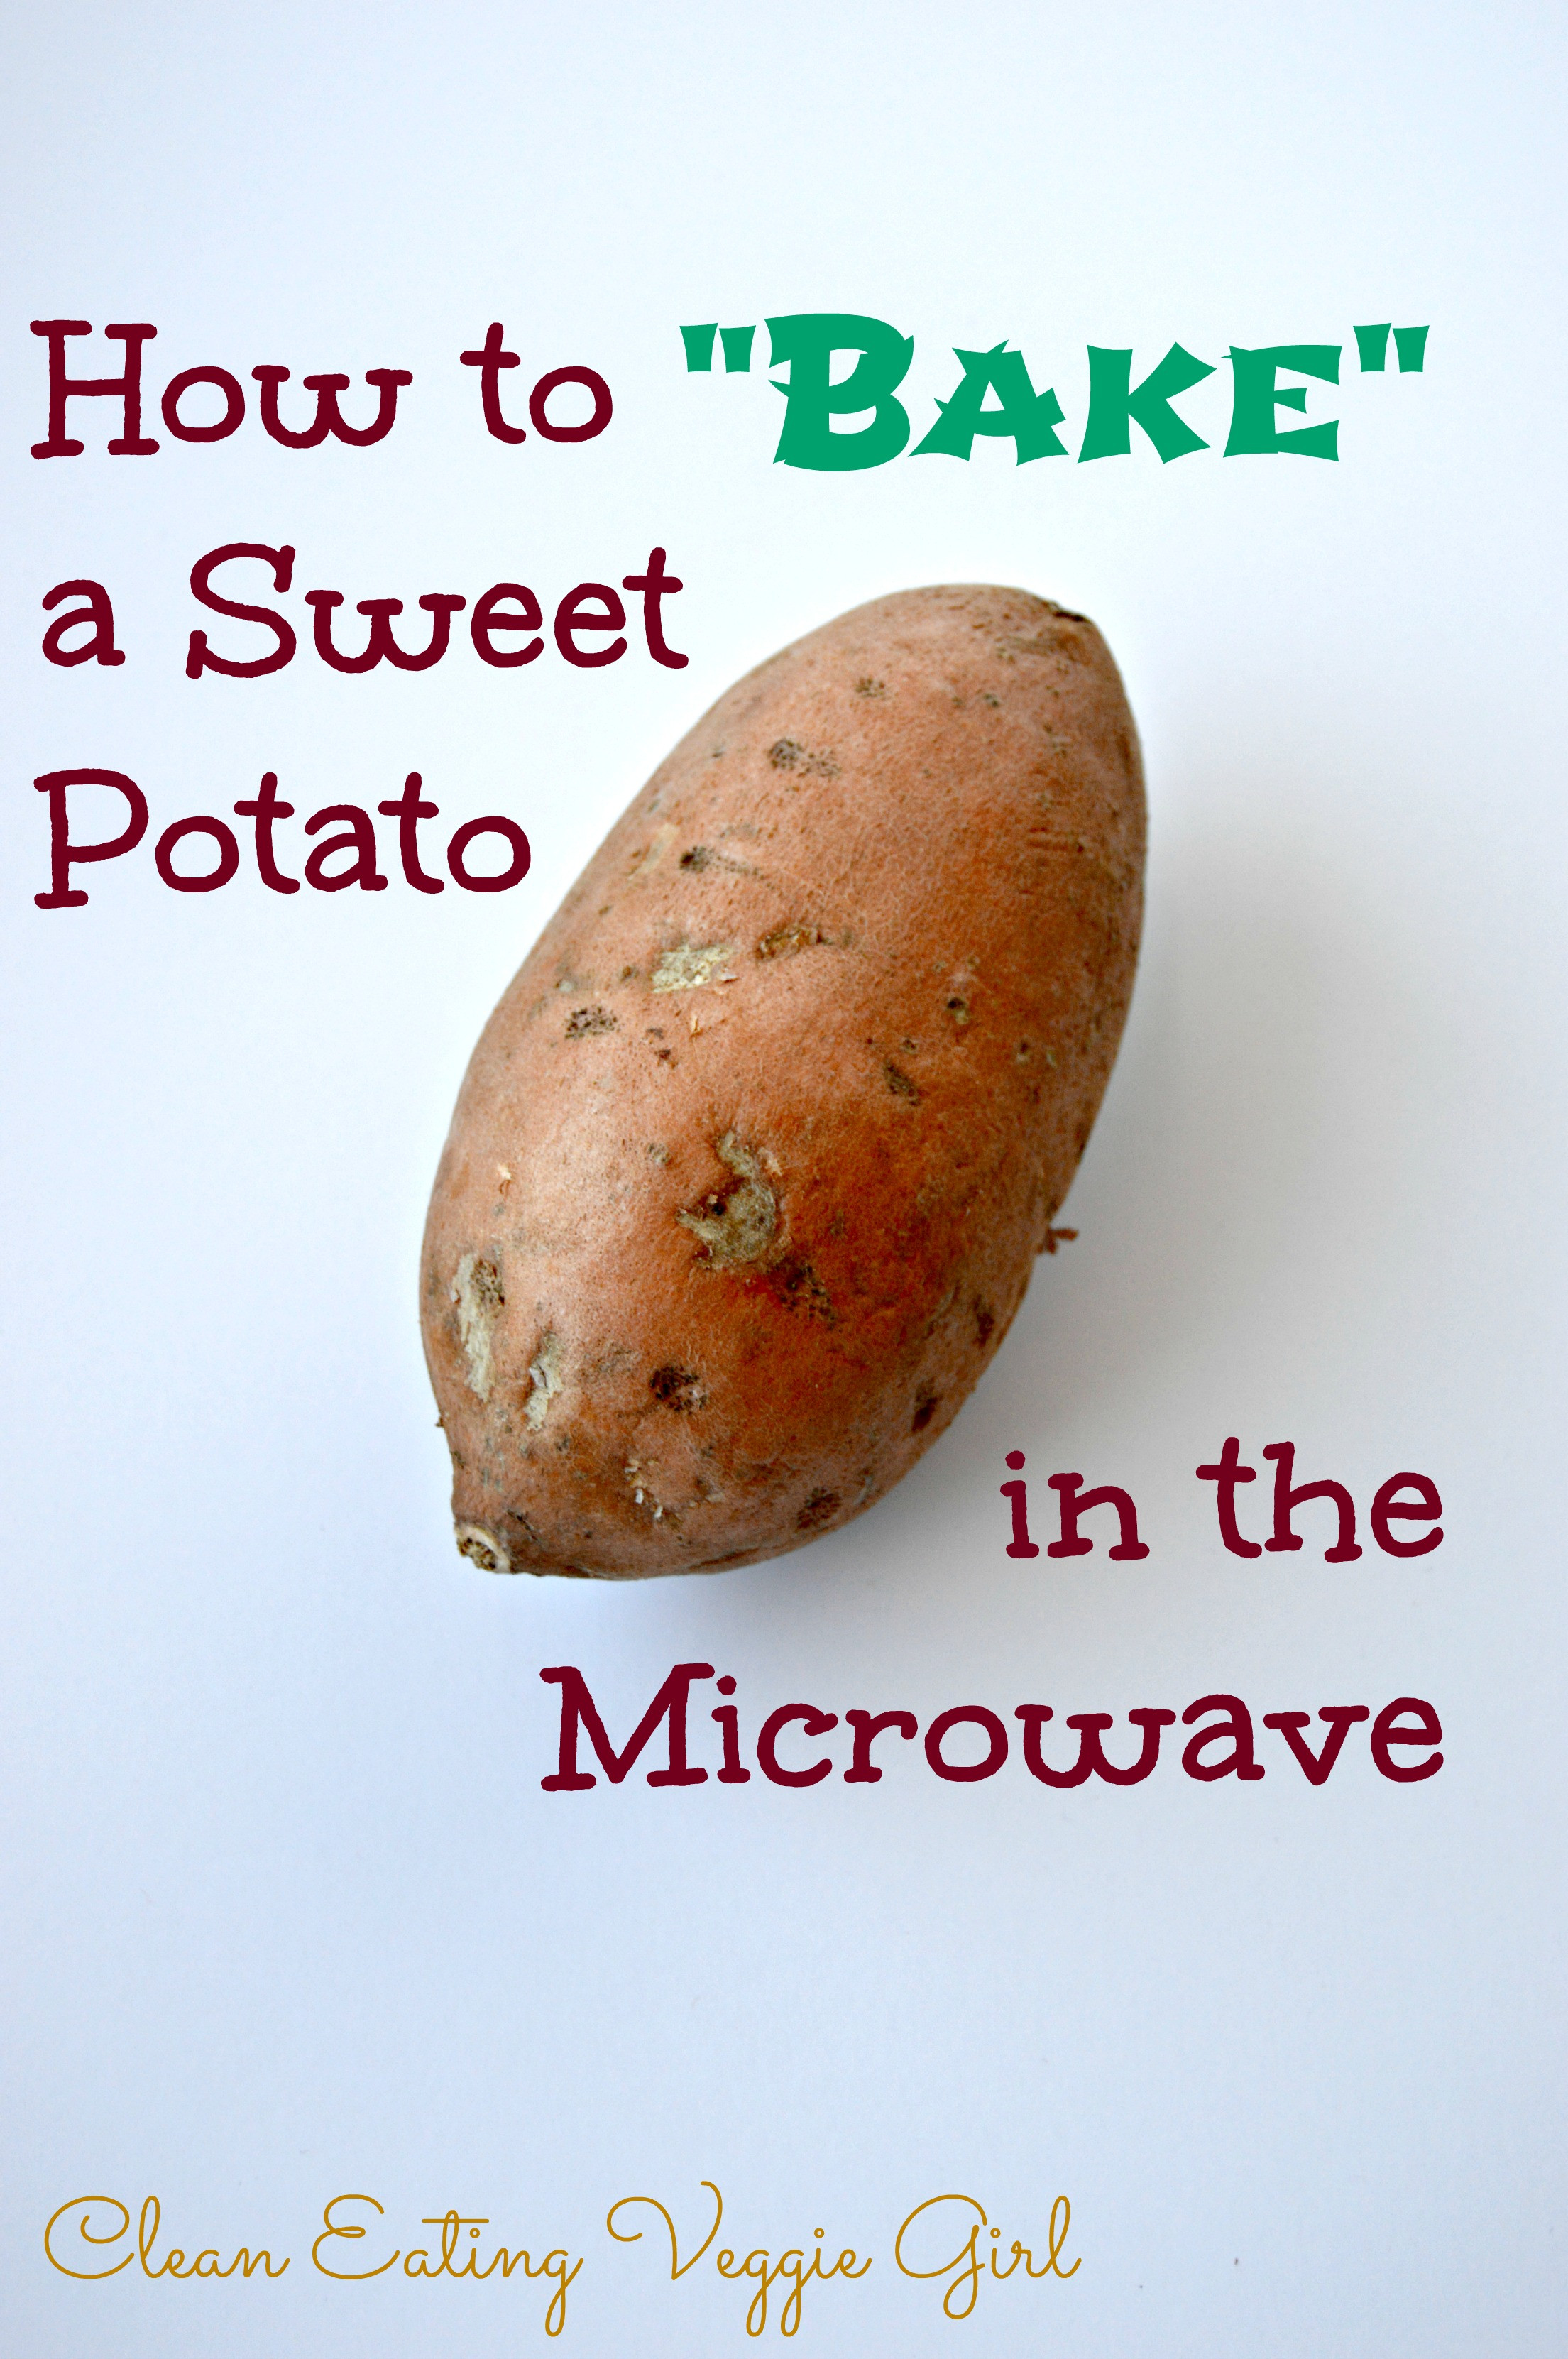 How To Cook Potato In Microwave
 How to Make a Baked Sweet Potato in the Microwave Clean